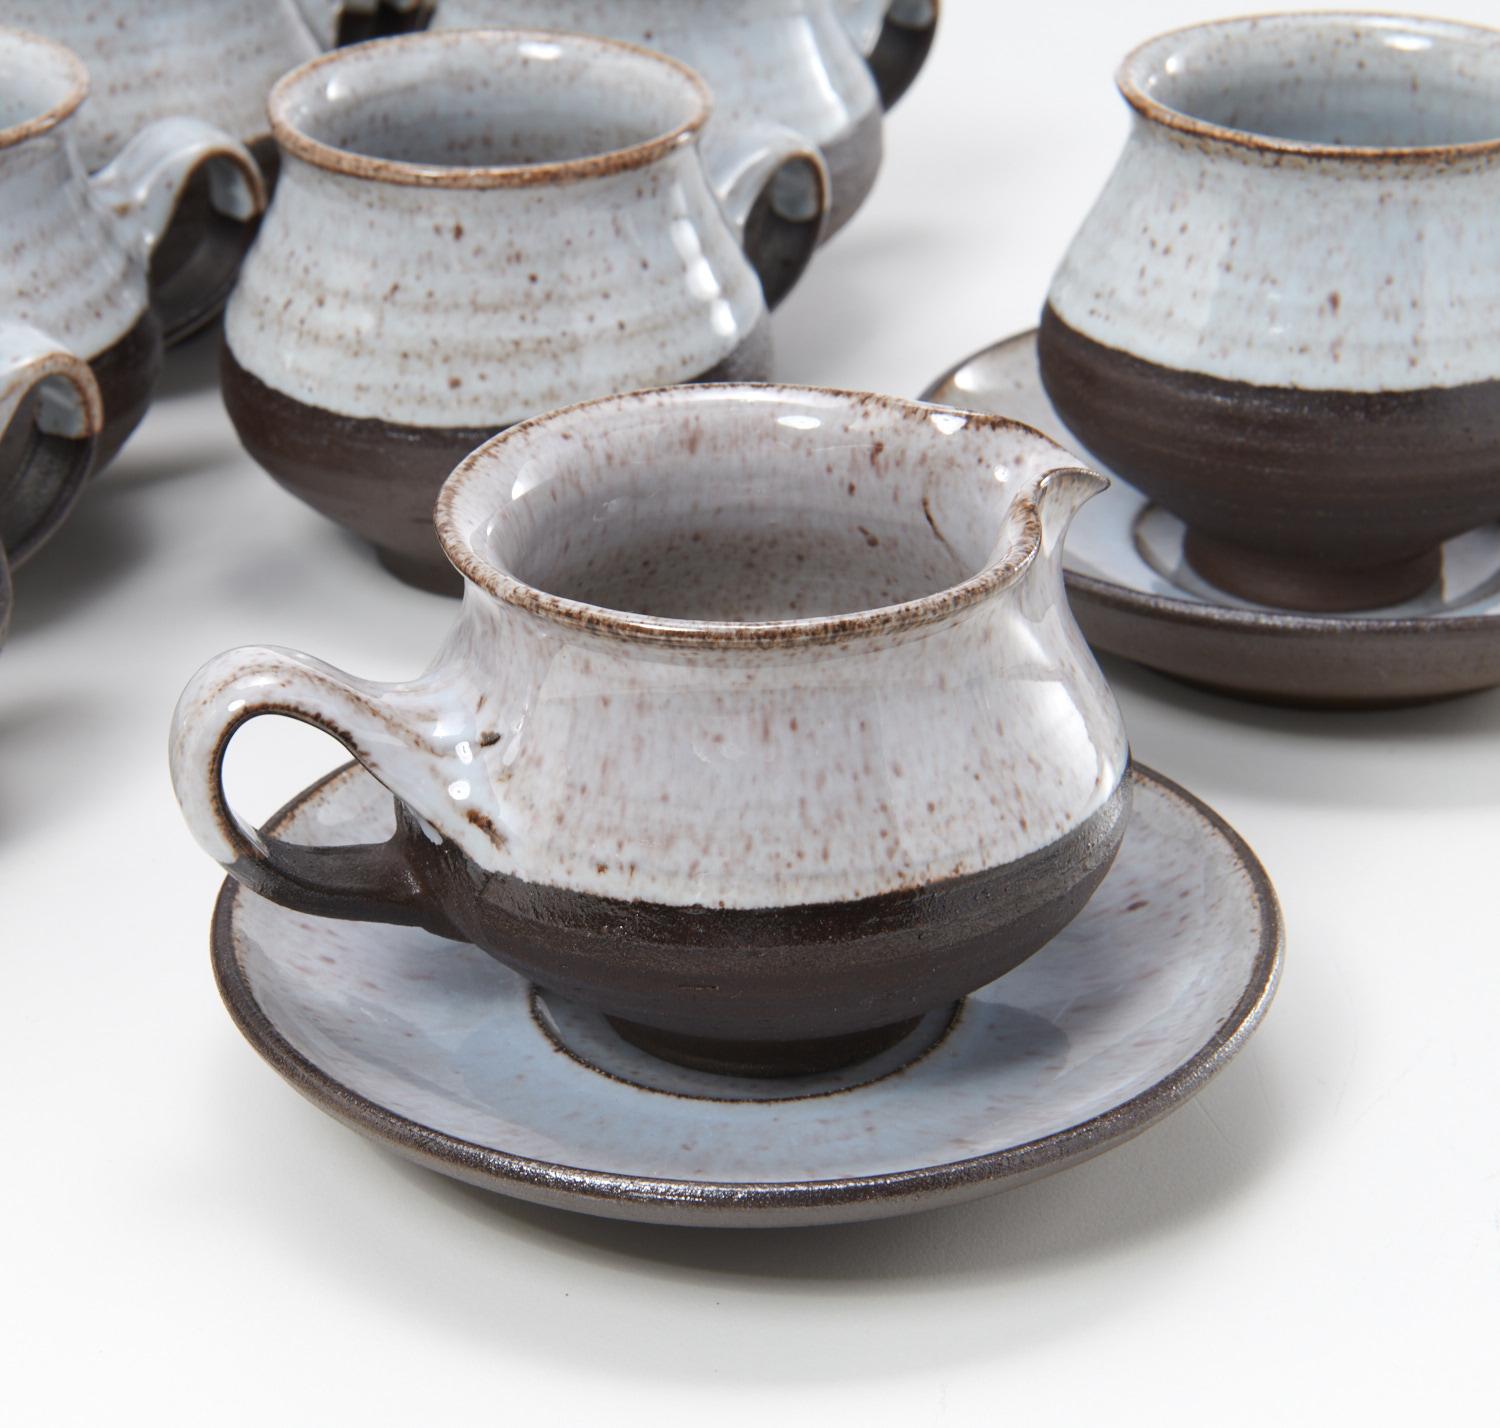 A remarkably intact set of 12 demitasse cups and 12 saucers (with creamers and sugar bowl) from renowned Danish potter, Henrik Ditlev Larsen. Ditlev was a very skilled potter and his work is both elegant and simple. These pieces have a lovely